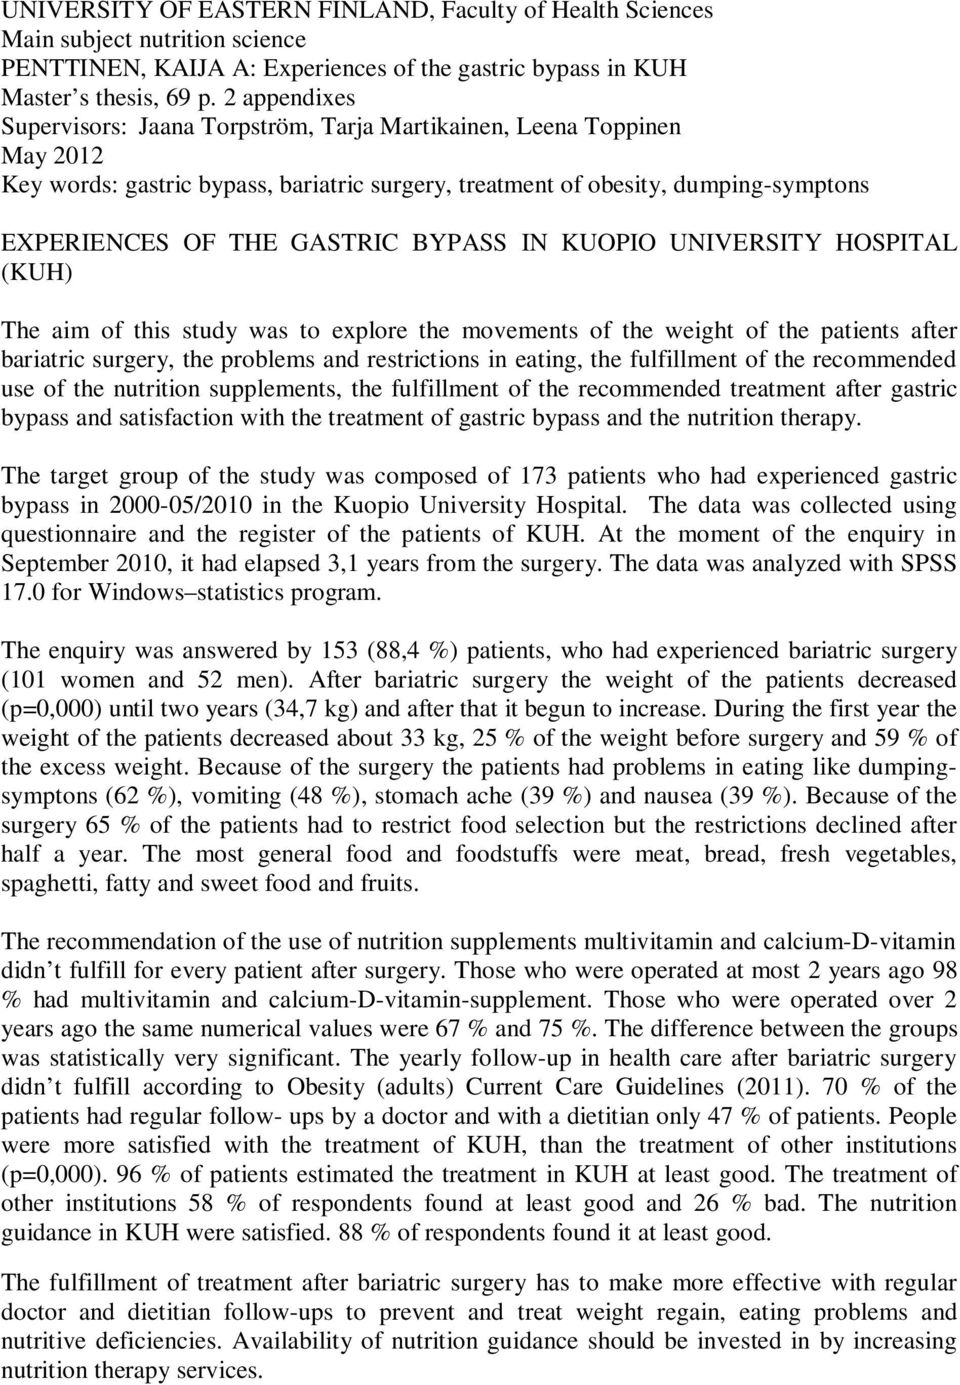 BYPASS IN KUOPIO UNIVERSITY HOSPITAL (KUH) The aim of this study was to explore the movements of the weight of the patients after bariatric surgery, the problems and restrictions in eating, the